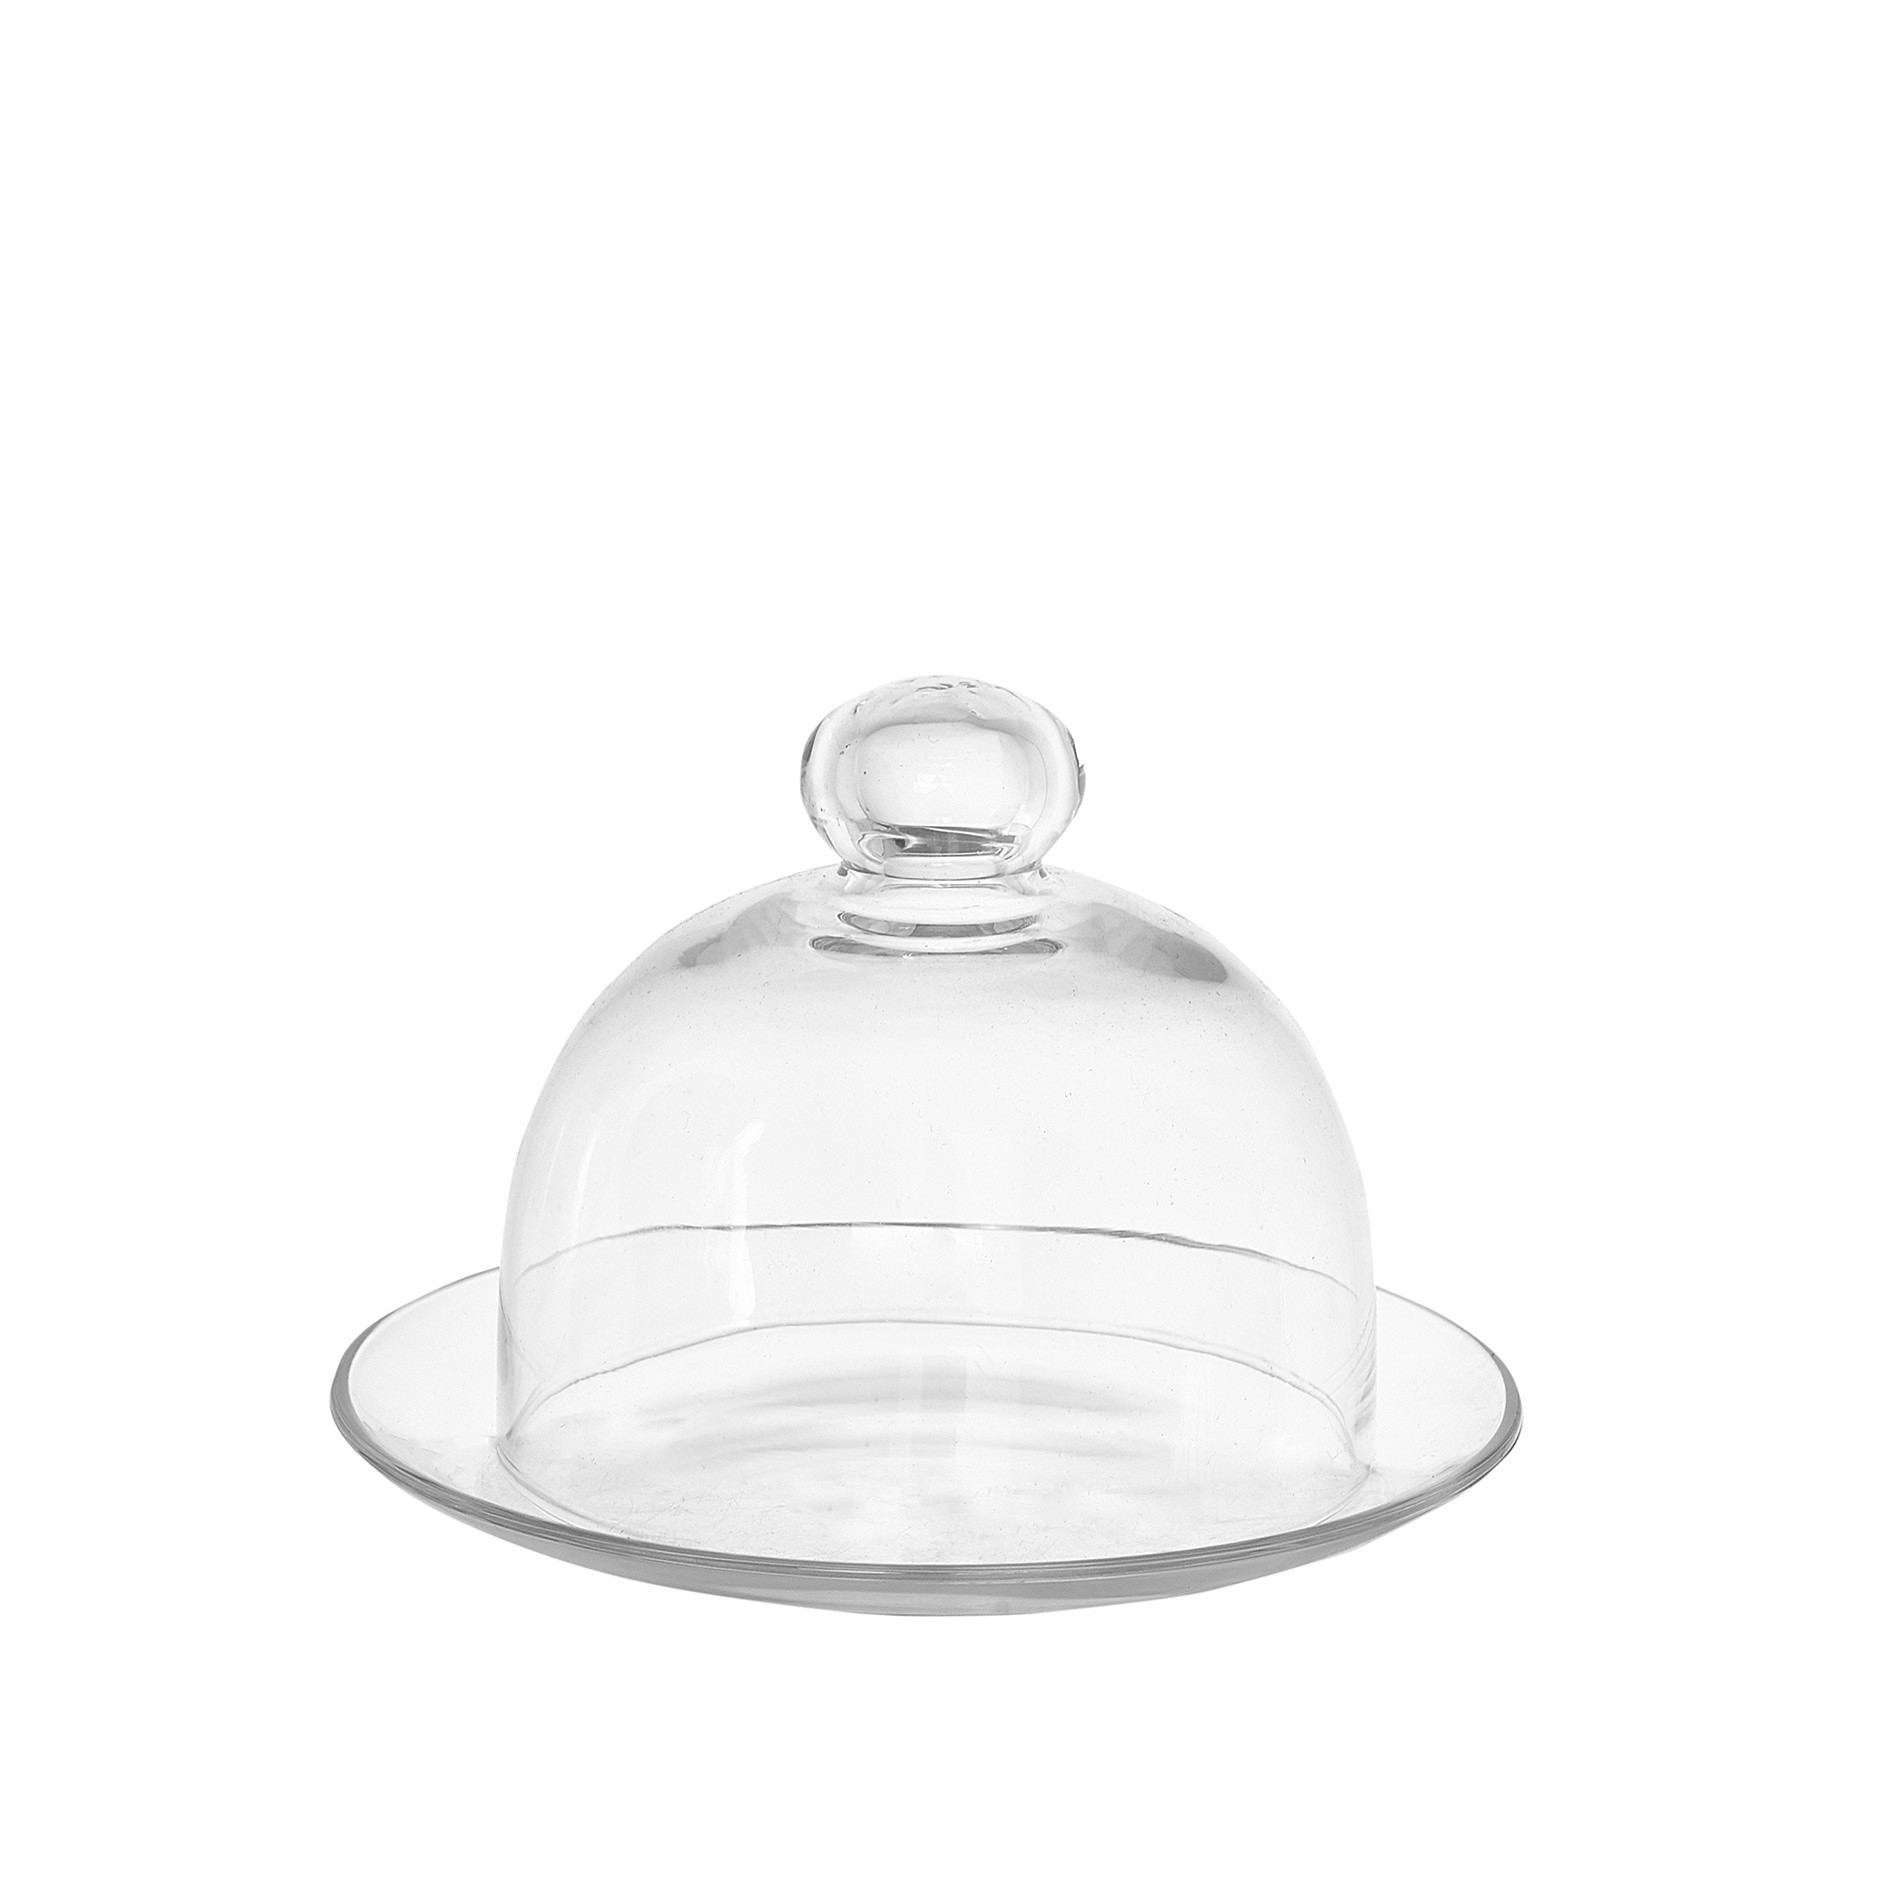 Plate with bell-shaped cover in glass, Transparent, large image number 0